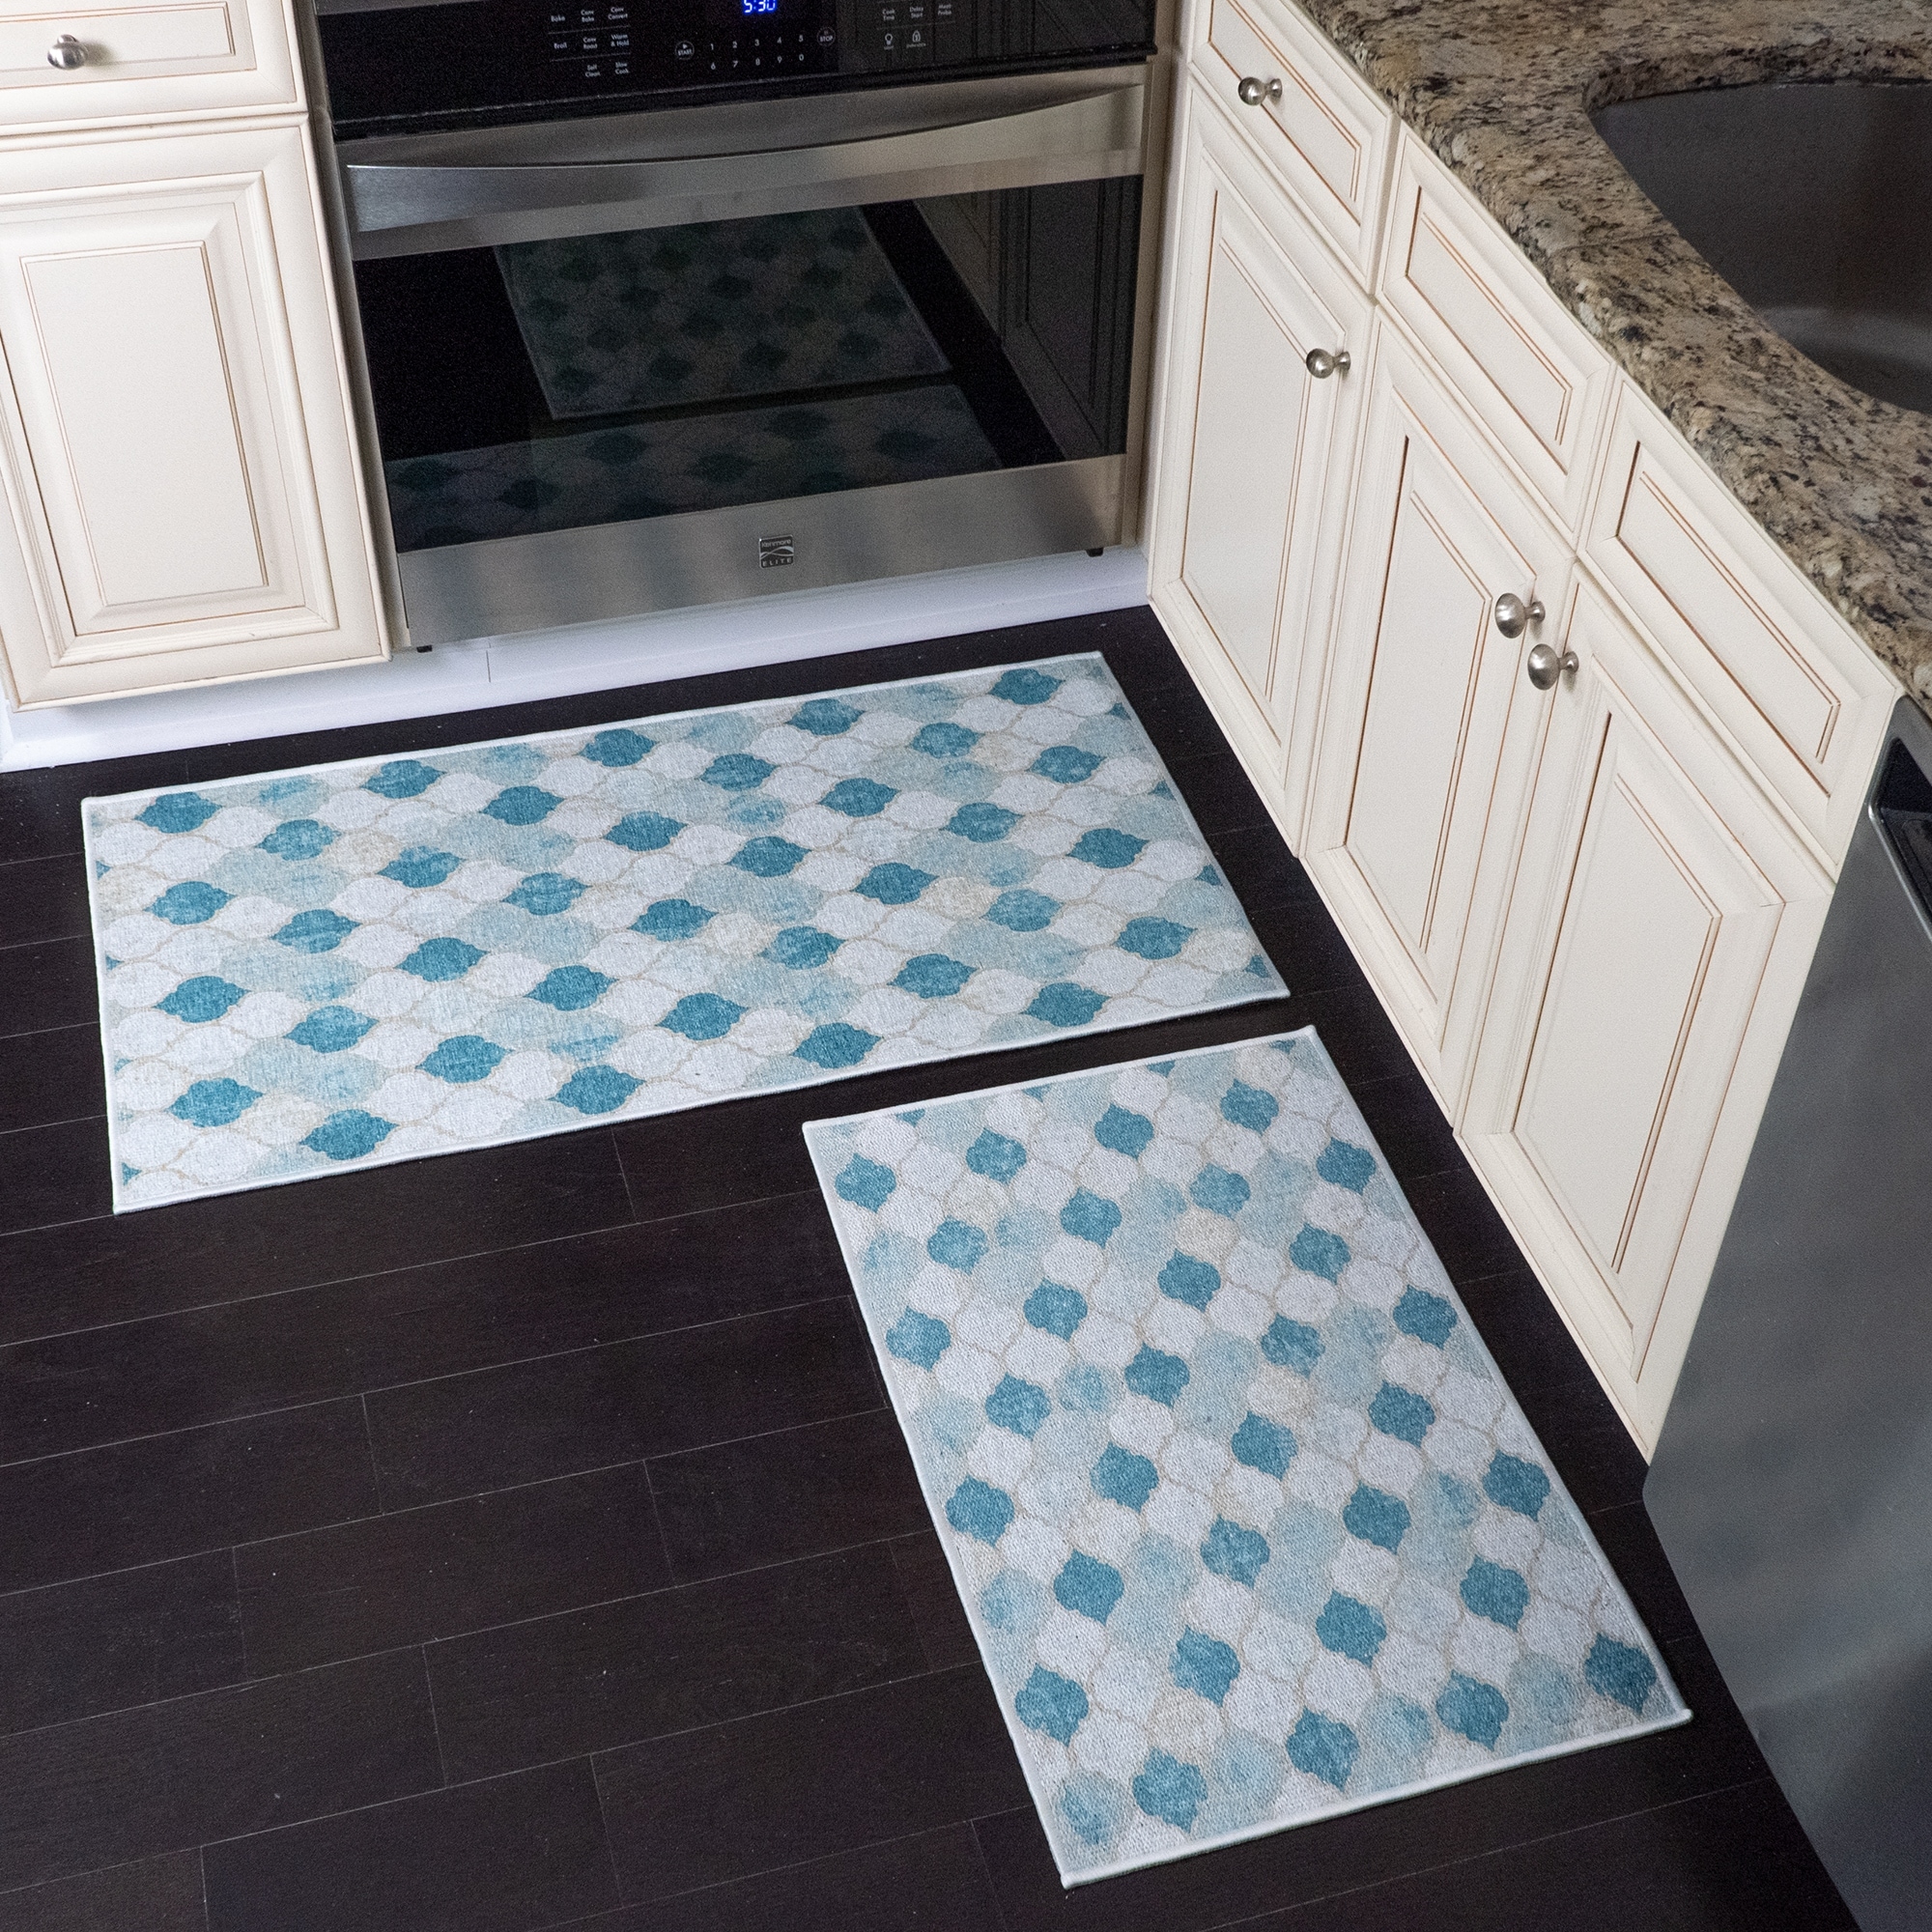 https://ak1.ostkcdn.com/images/products/is/images/direct/85559cb2d78310debaec553ecf91982f41be2975/Non-Skid-Washable-Kitchen-Runner-Rugs-Set-of-2---Set-of-44-x-24-and-31.5-x-20-Inches-Low-Pile-Floor-Mats.jpg